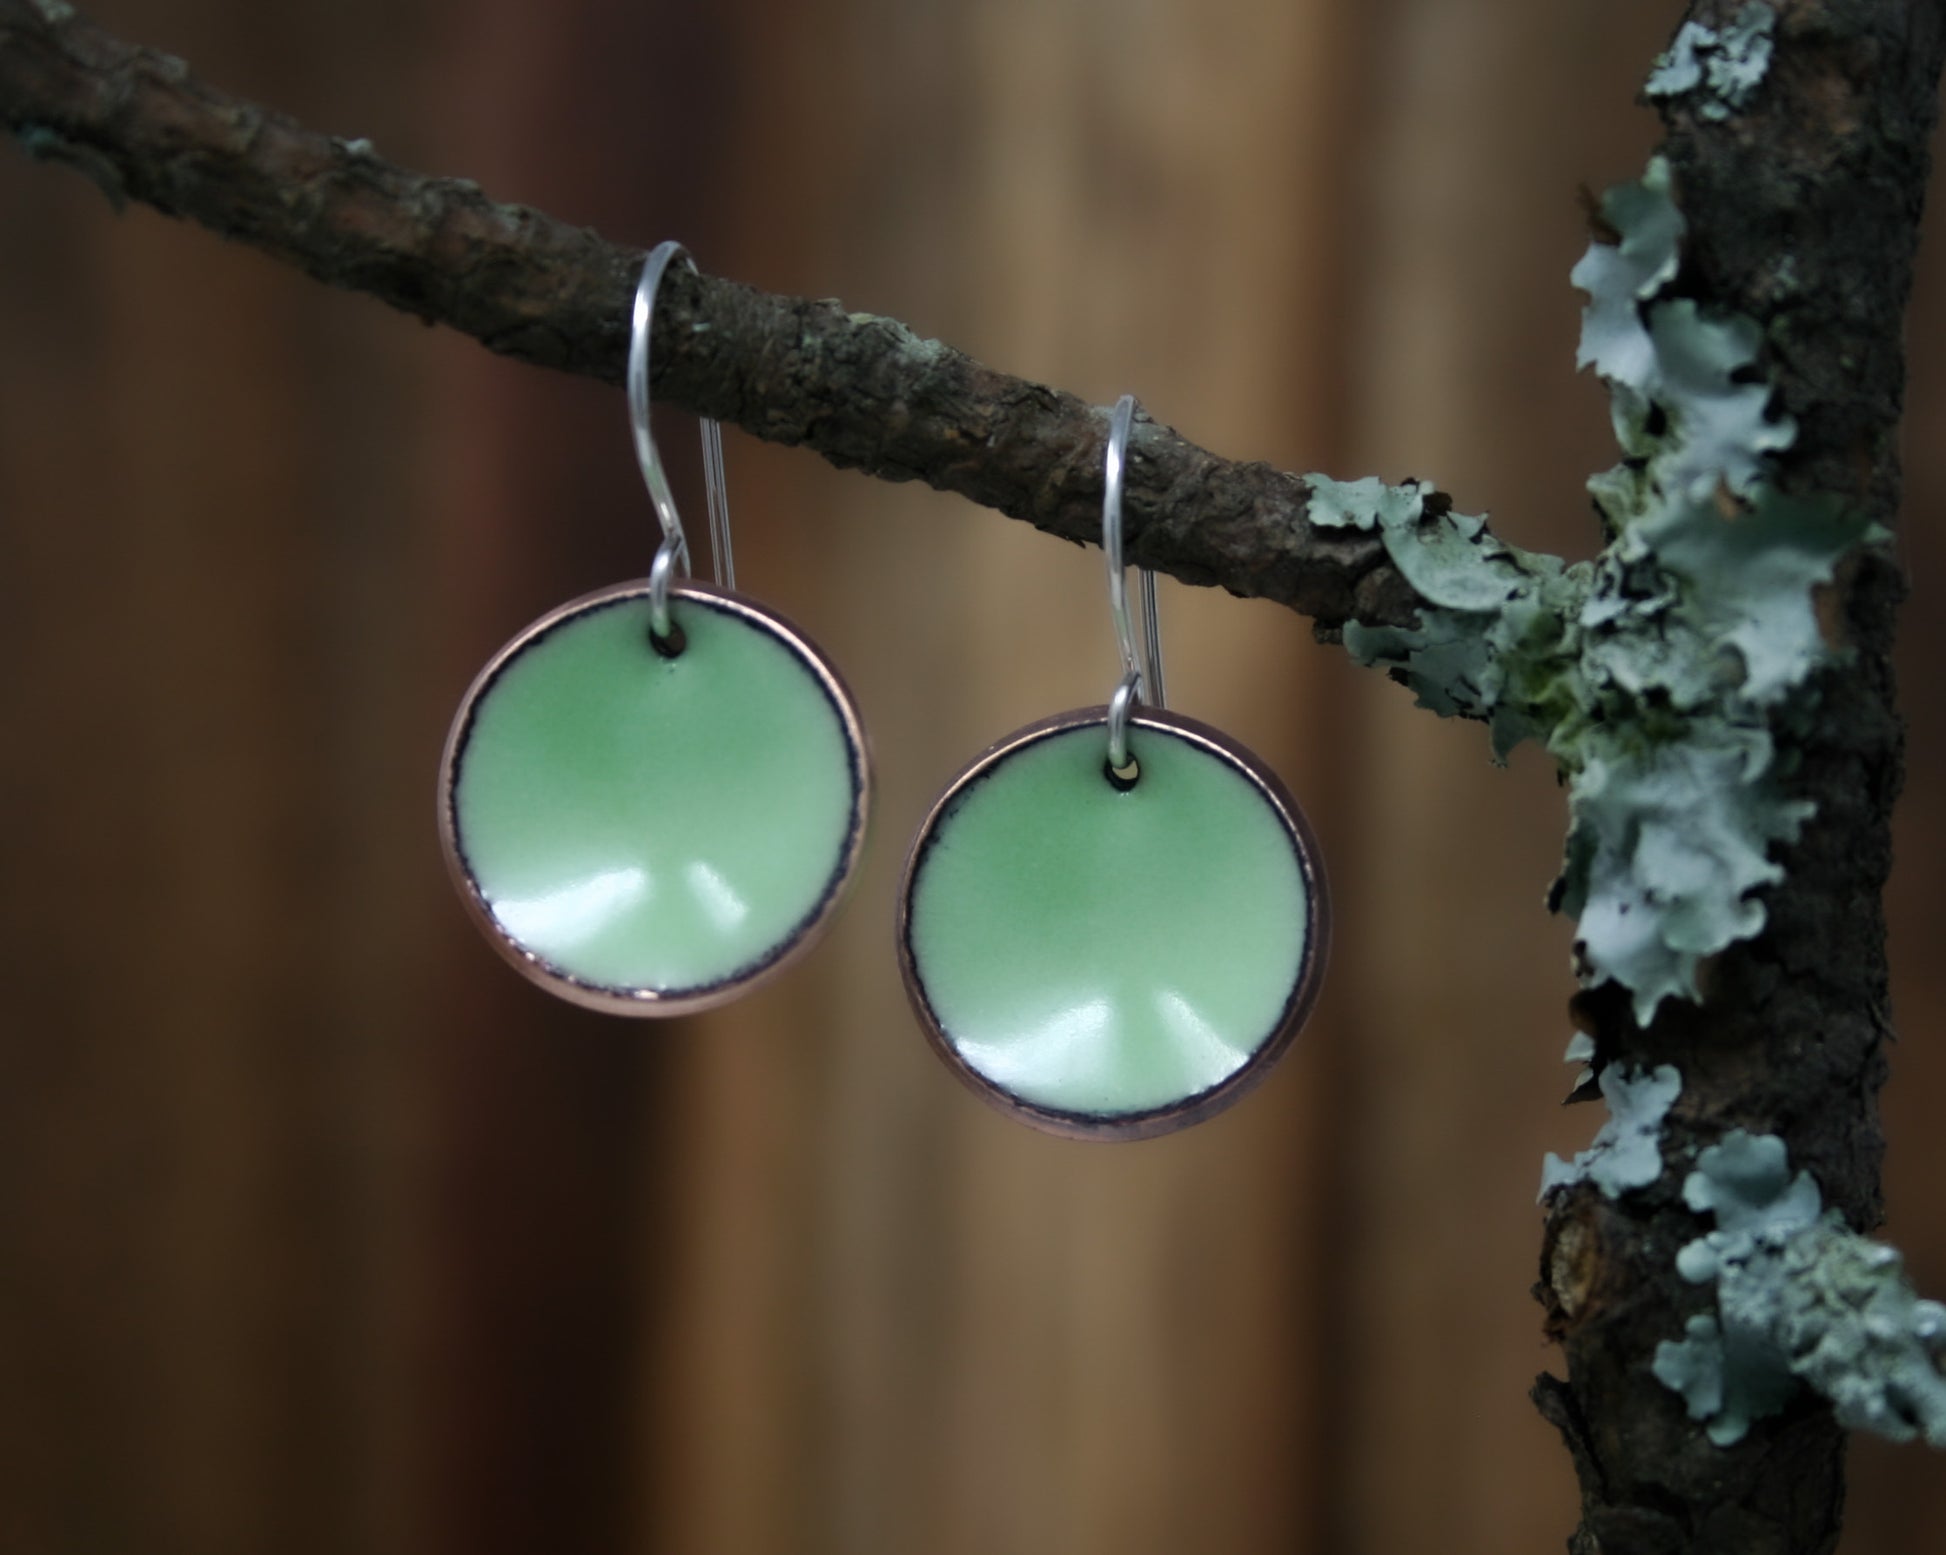 a pair of green earrings hanging from a tree branch